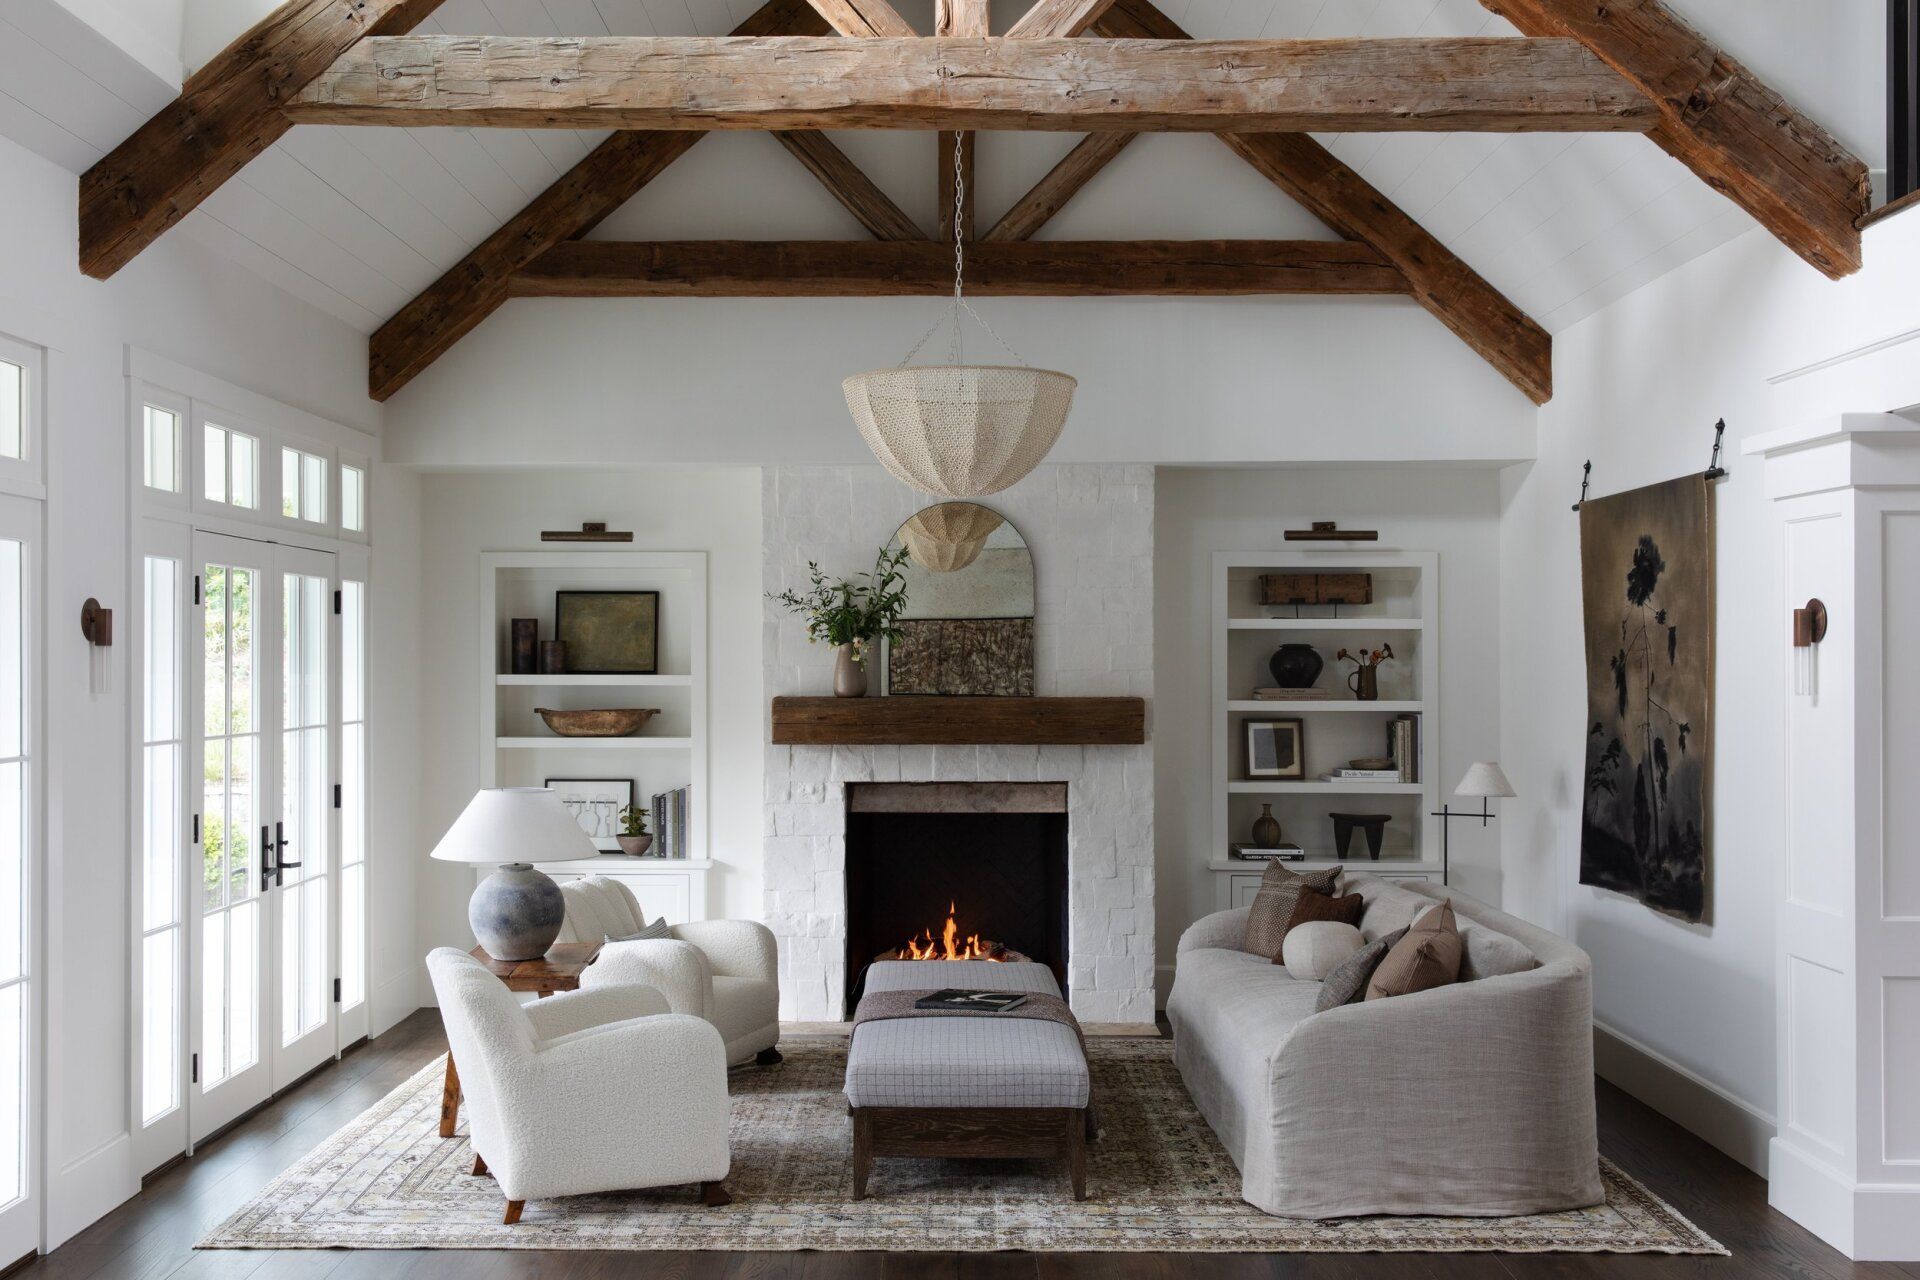 Inviting Los Angeles real estate property of LKP Group living space with a cozy fireplace and elegant white furniture